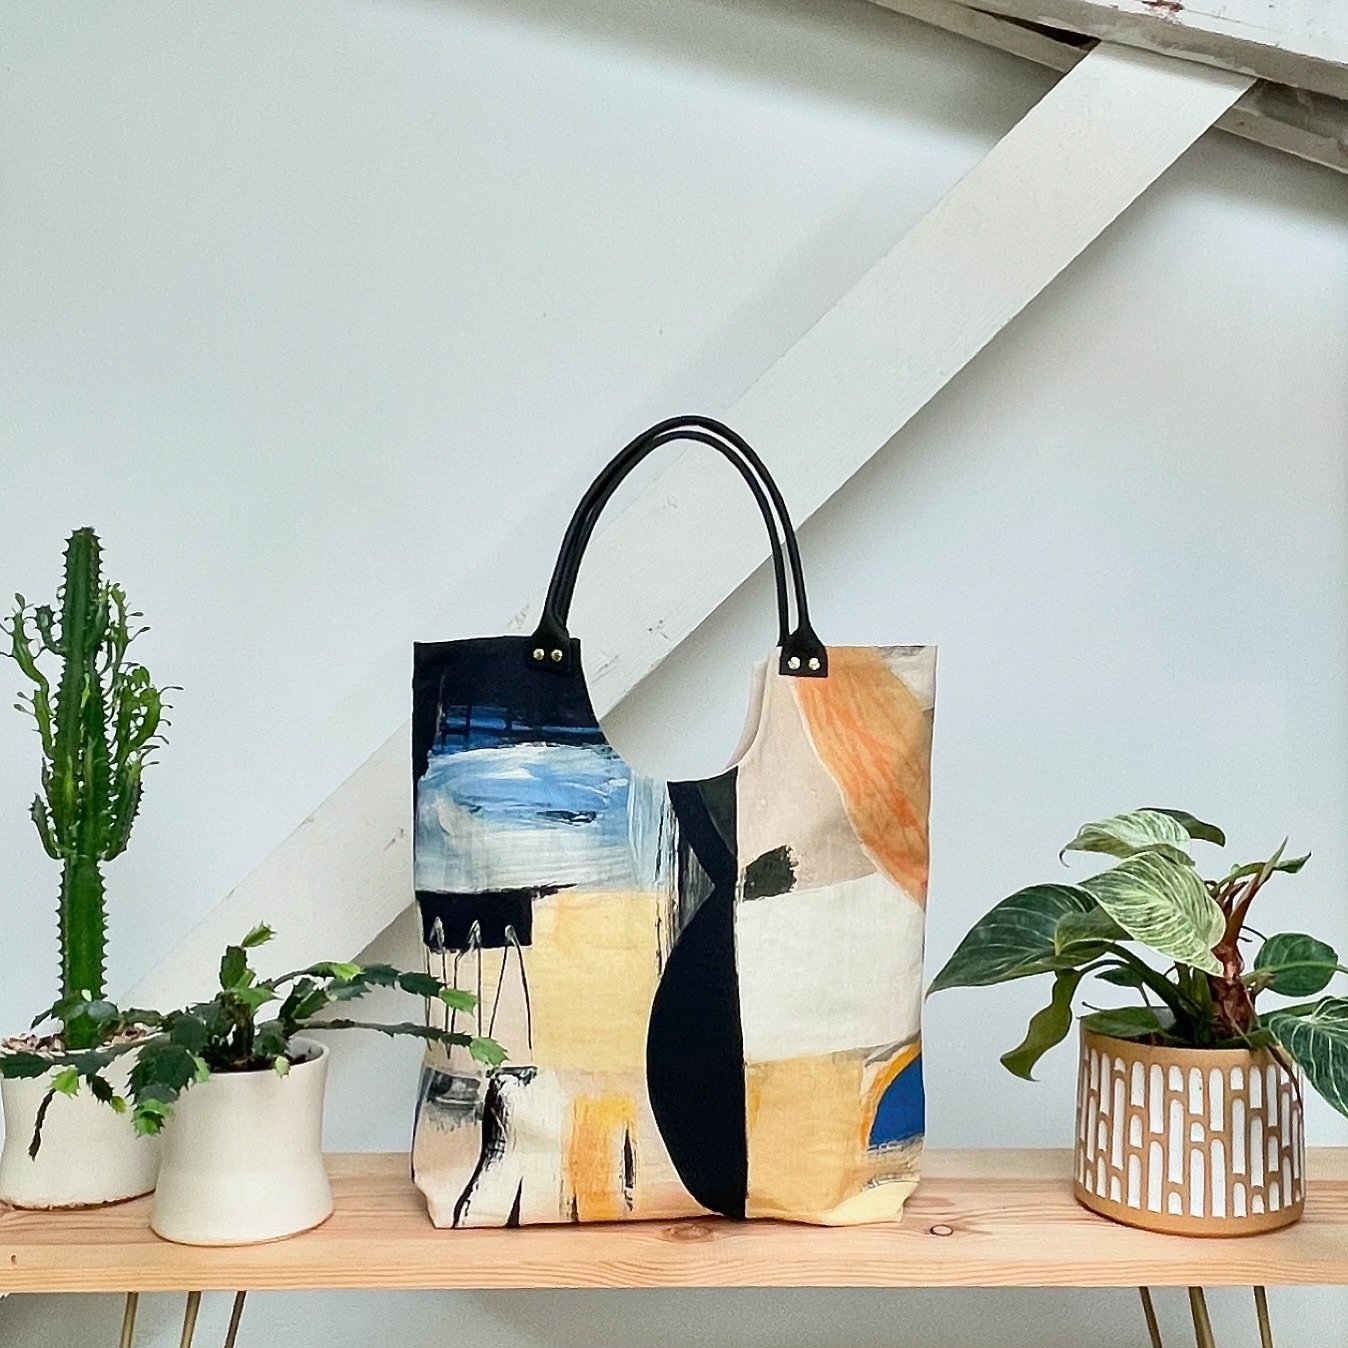 Still one of our best selling bags! Look sharp with the KAT TOTE in SOHO. Fabric designed in collaboration with fab PNW artist @micah_kassell 💛 Get ready to rock summer with this beauty. ☀️